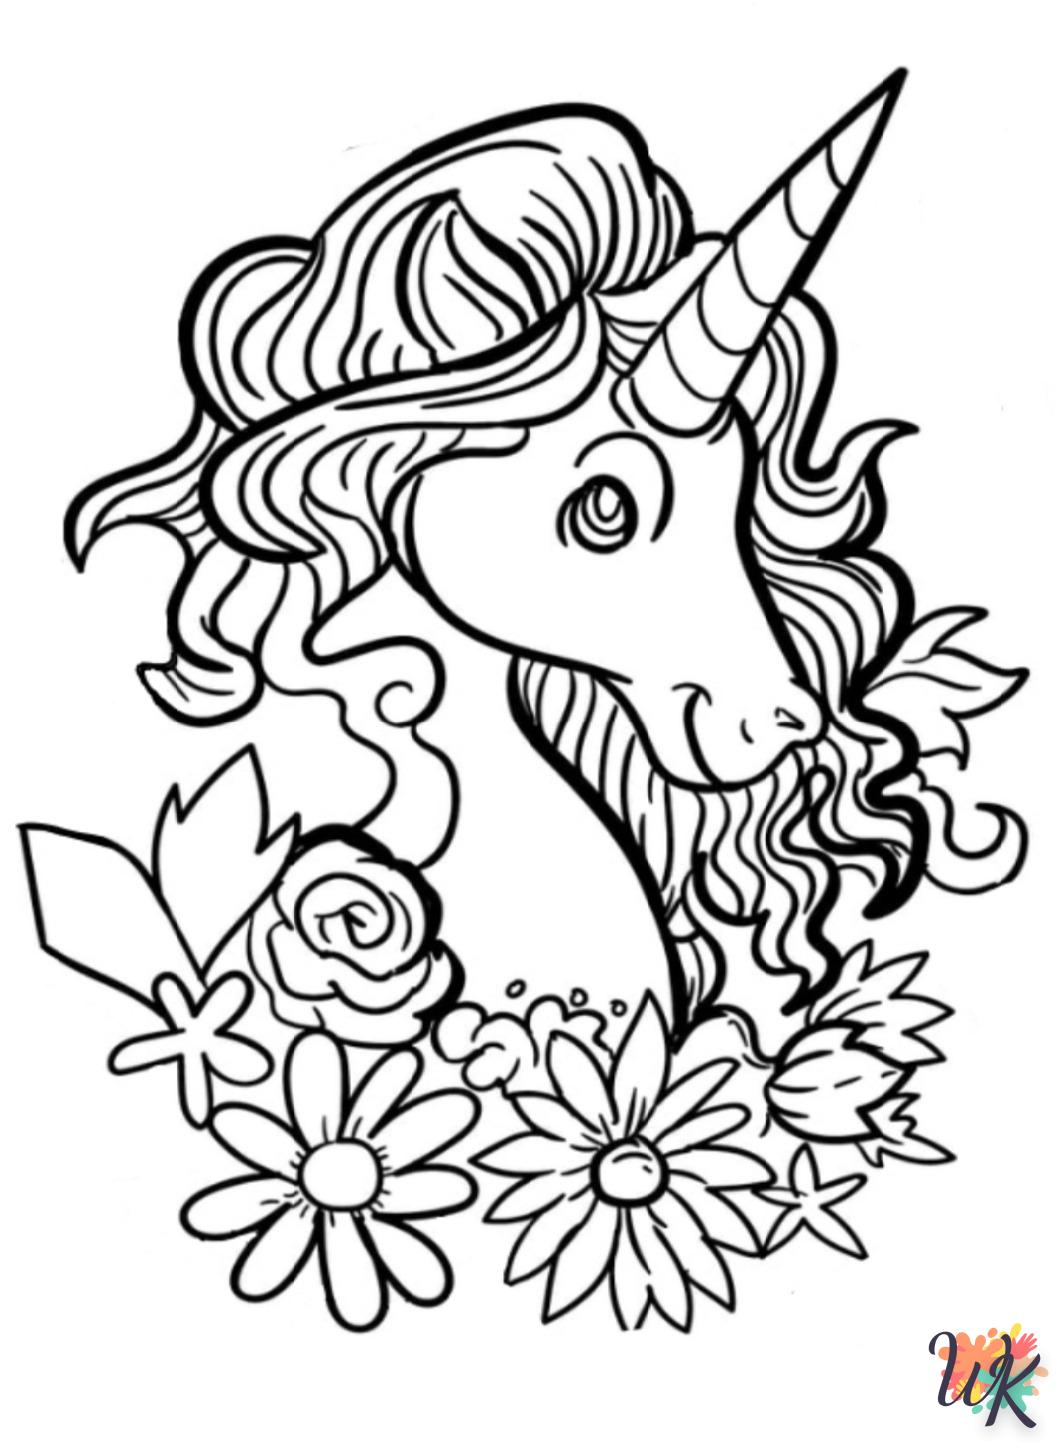 Unicorn coloring pages easy